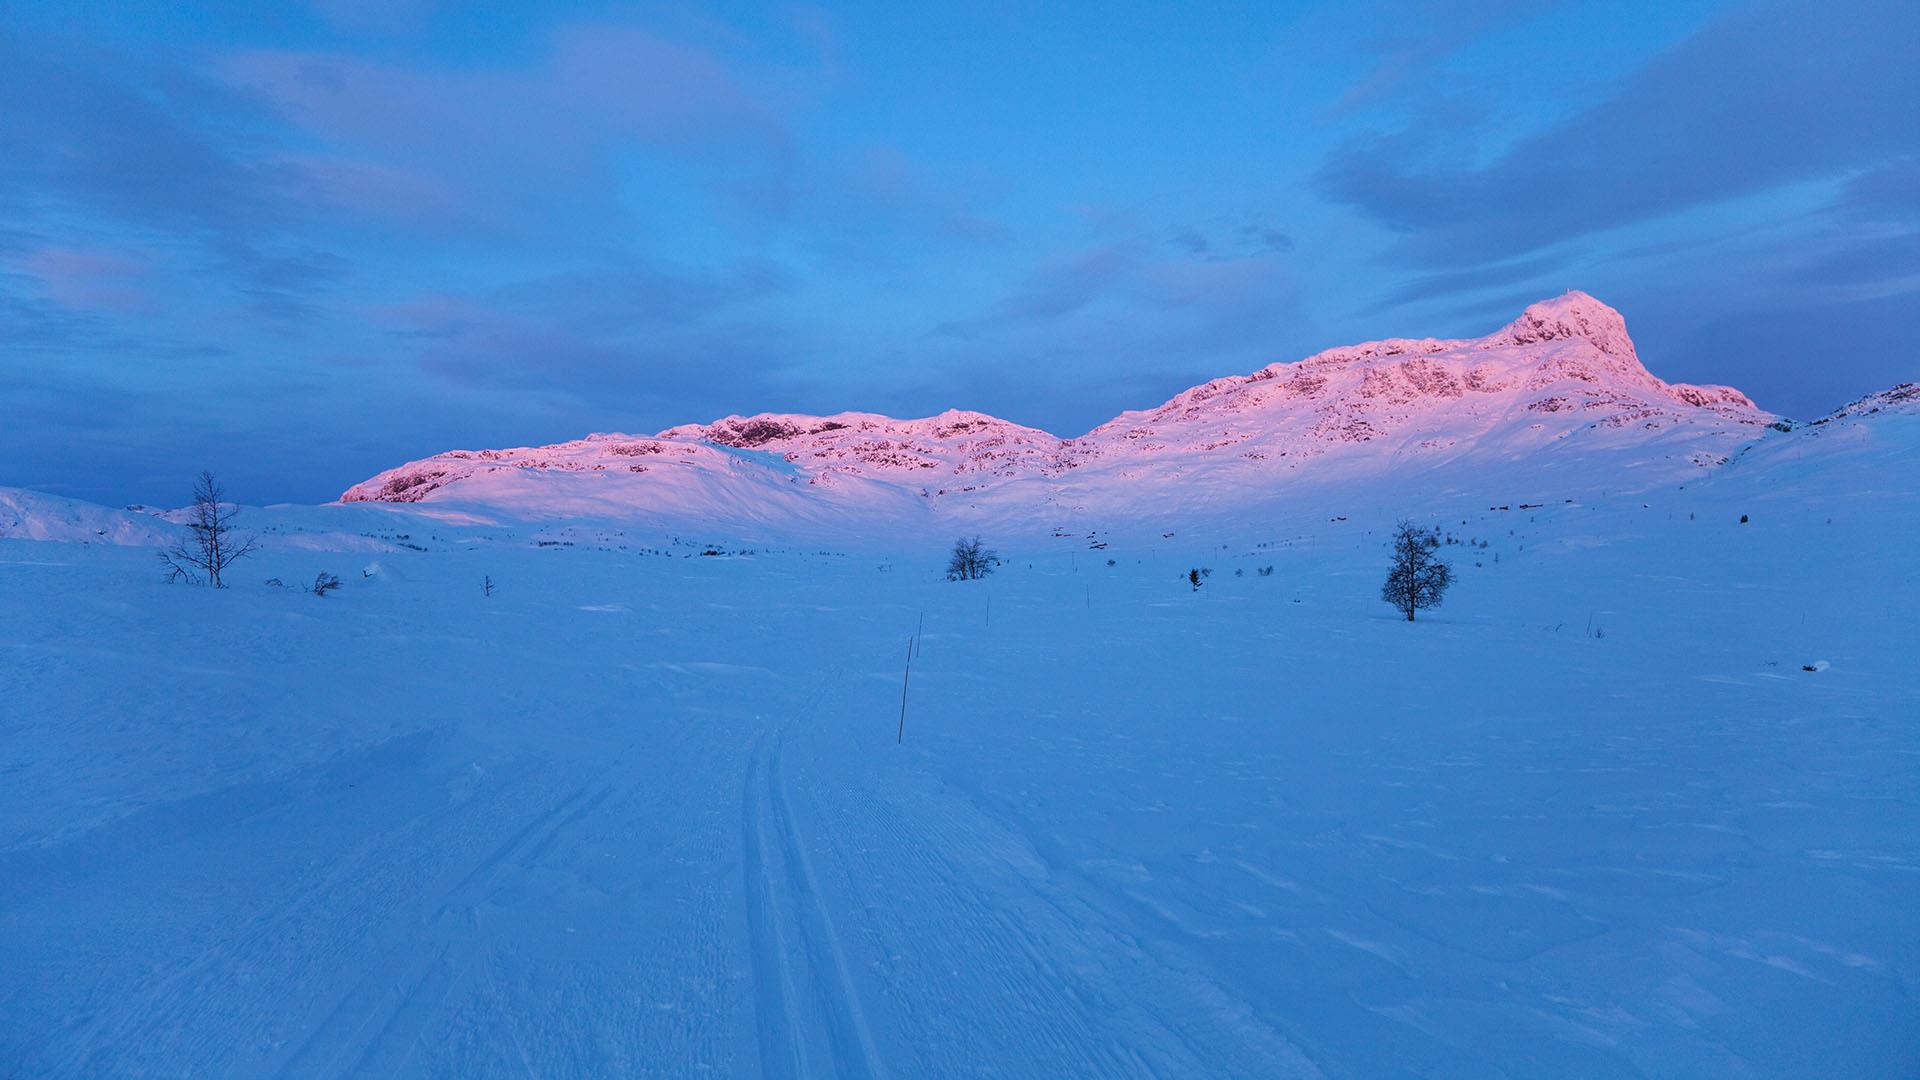 Sunrise in the winter mountyains. The first sunrays paint a mountain pink, while the cross-country skiing track in the foreground and surroundings still ly in deep blue shadow.